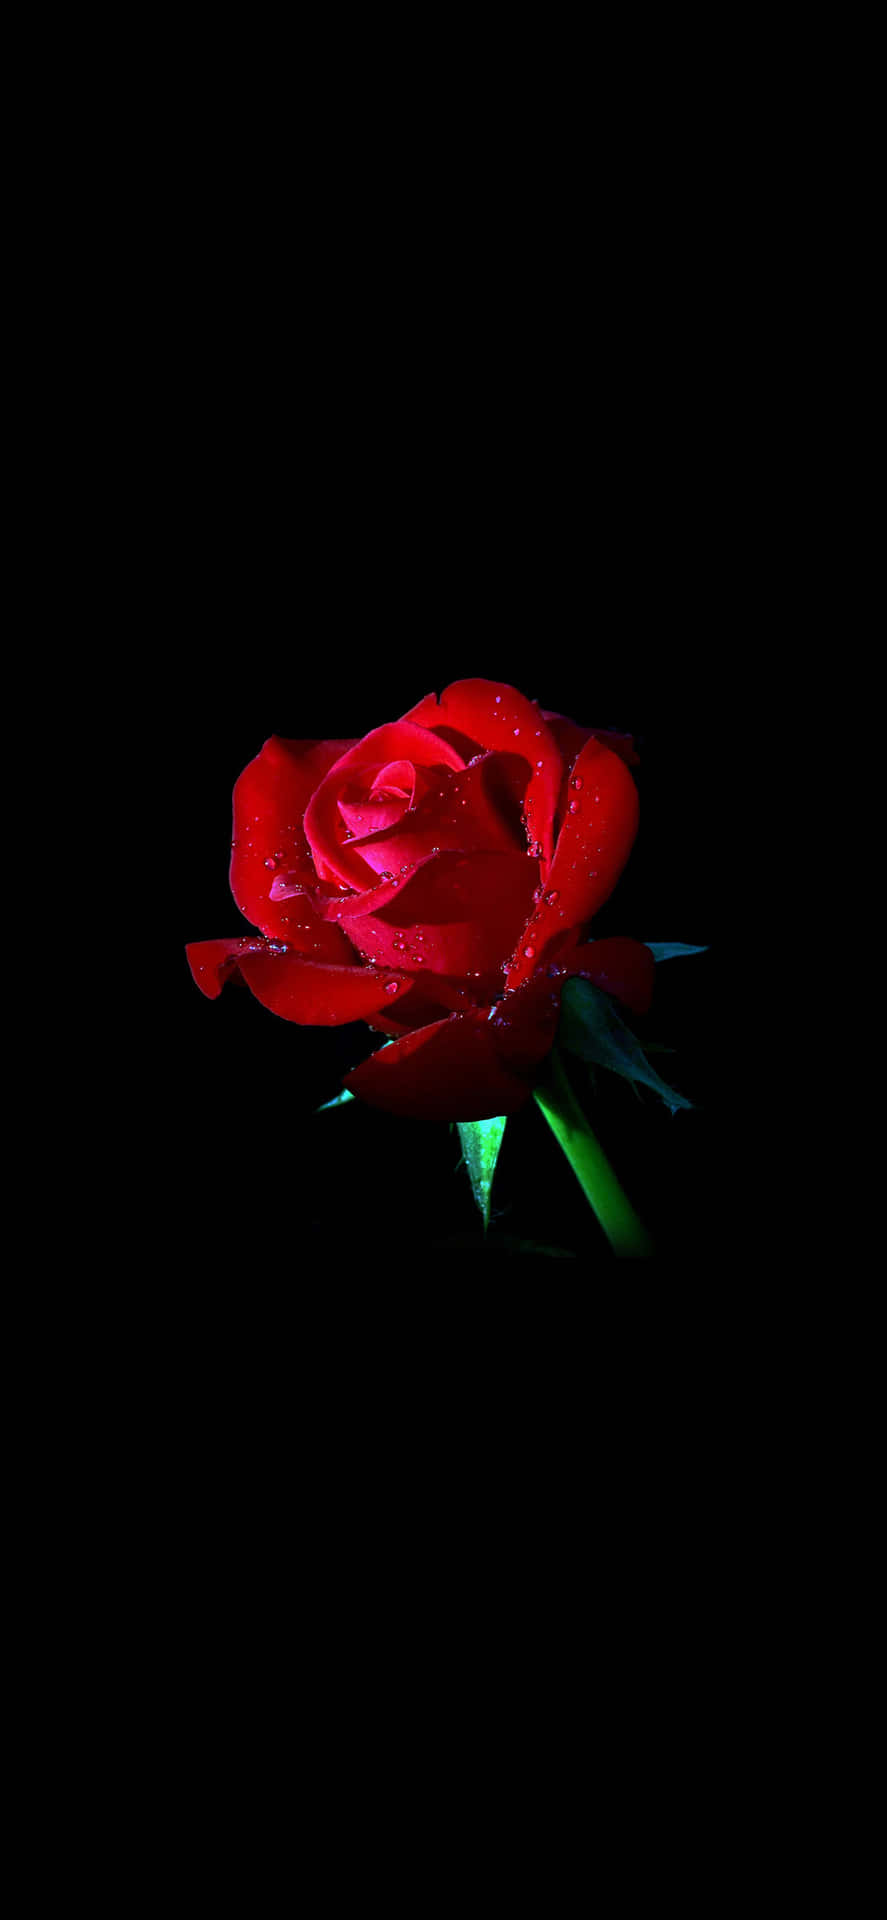 Download A Red Rose On A Black Background 